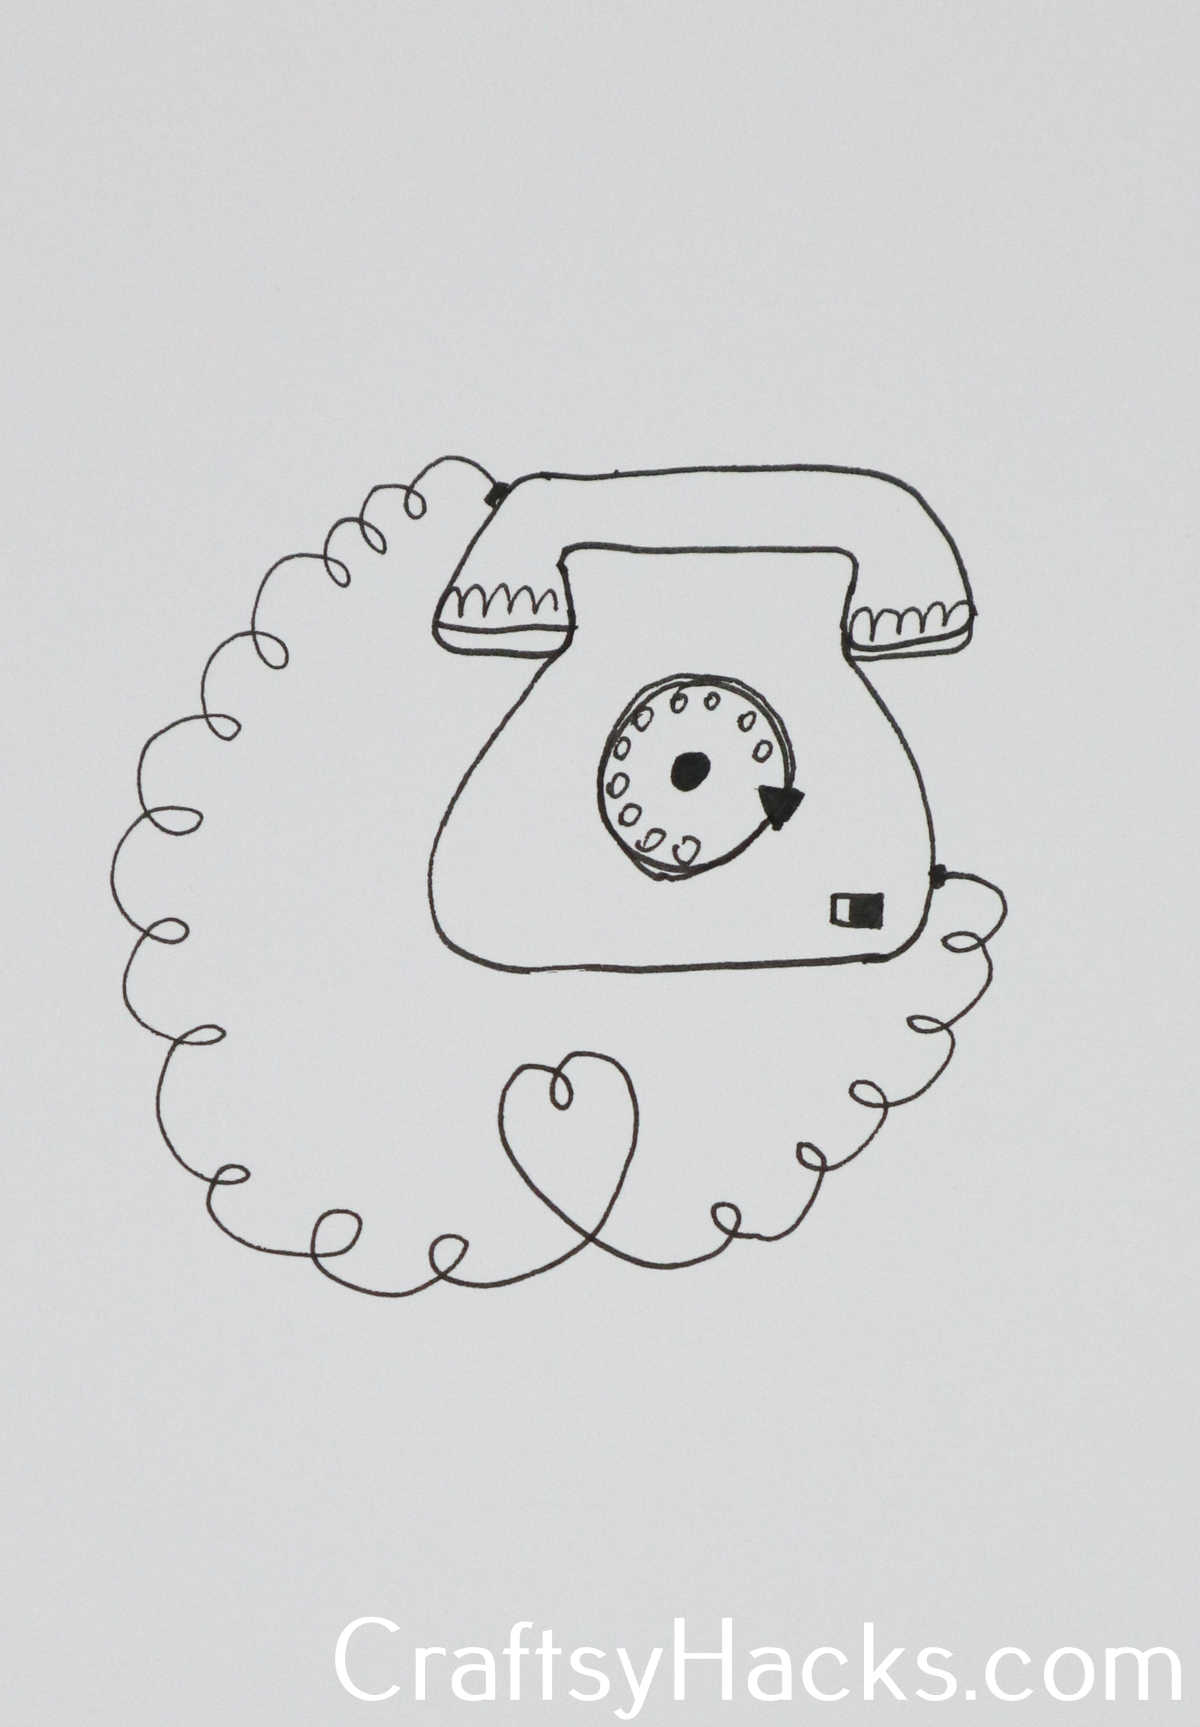 corded telephone doodle